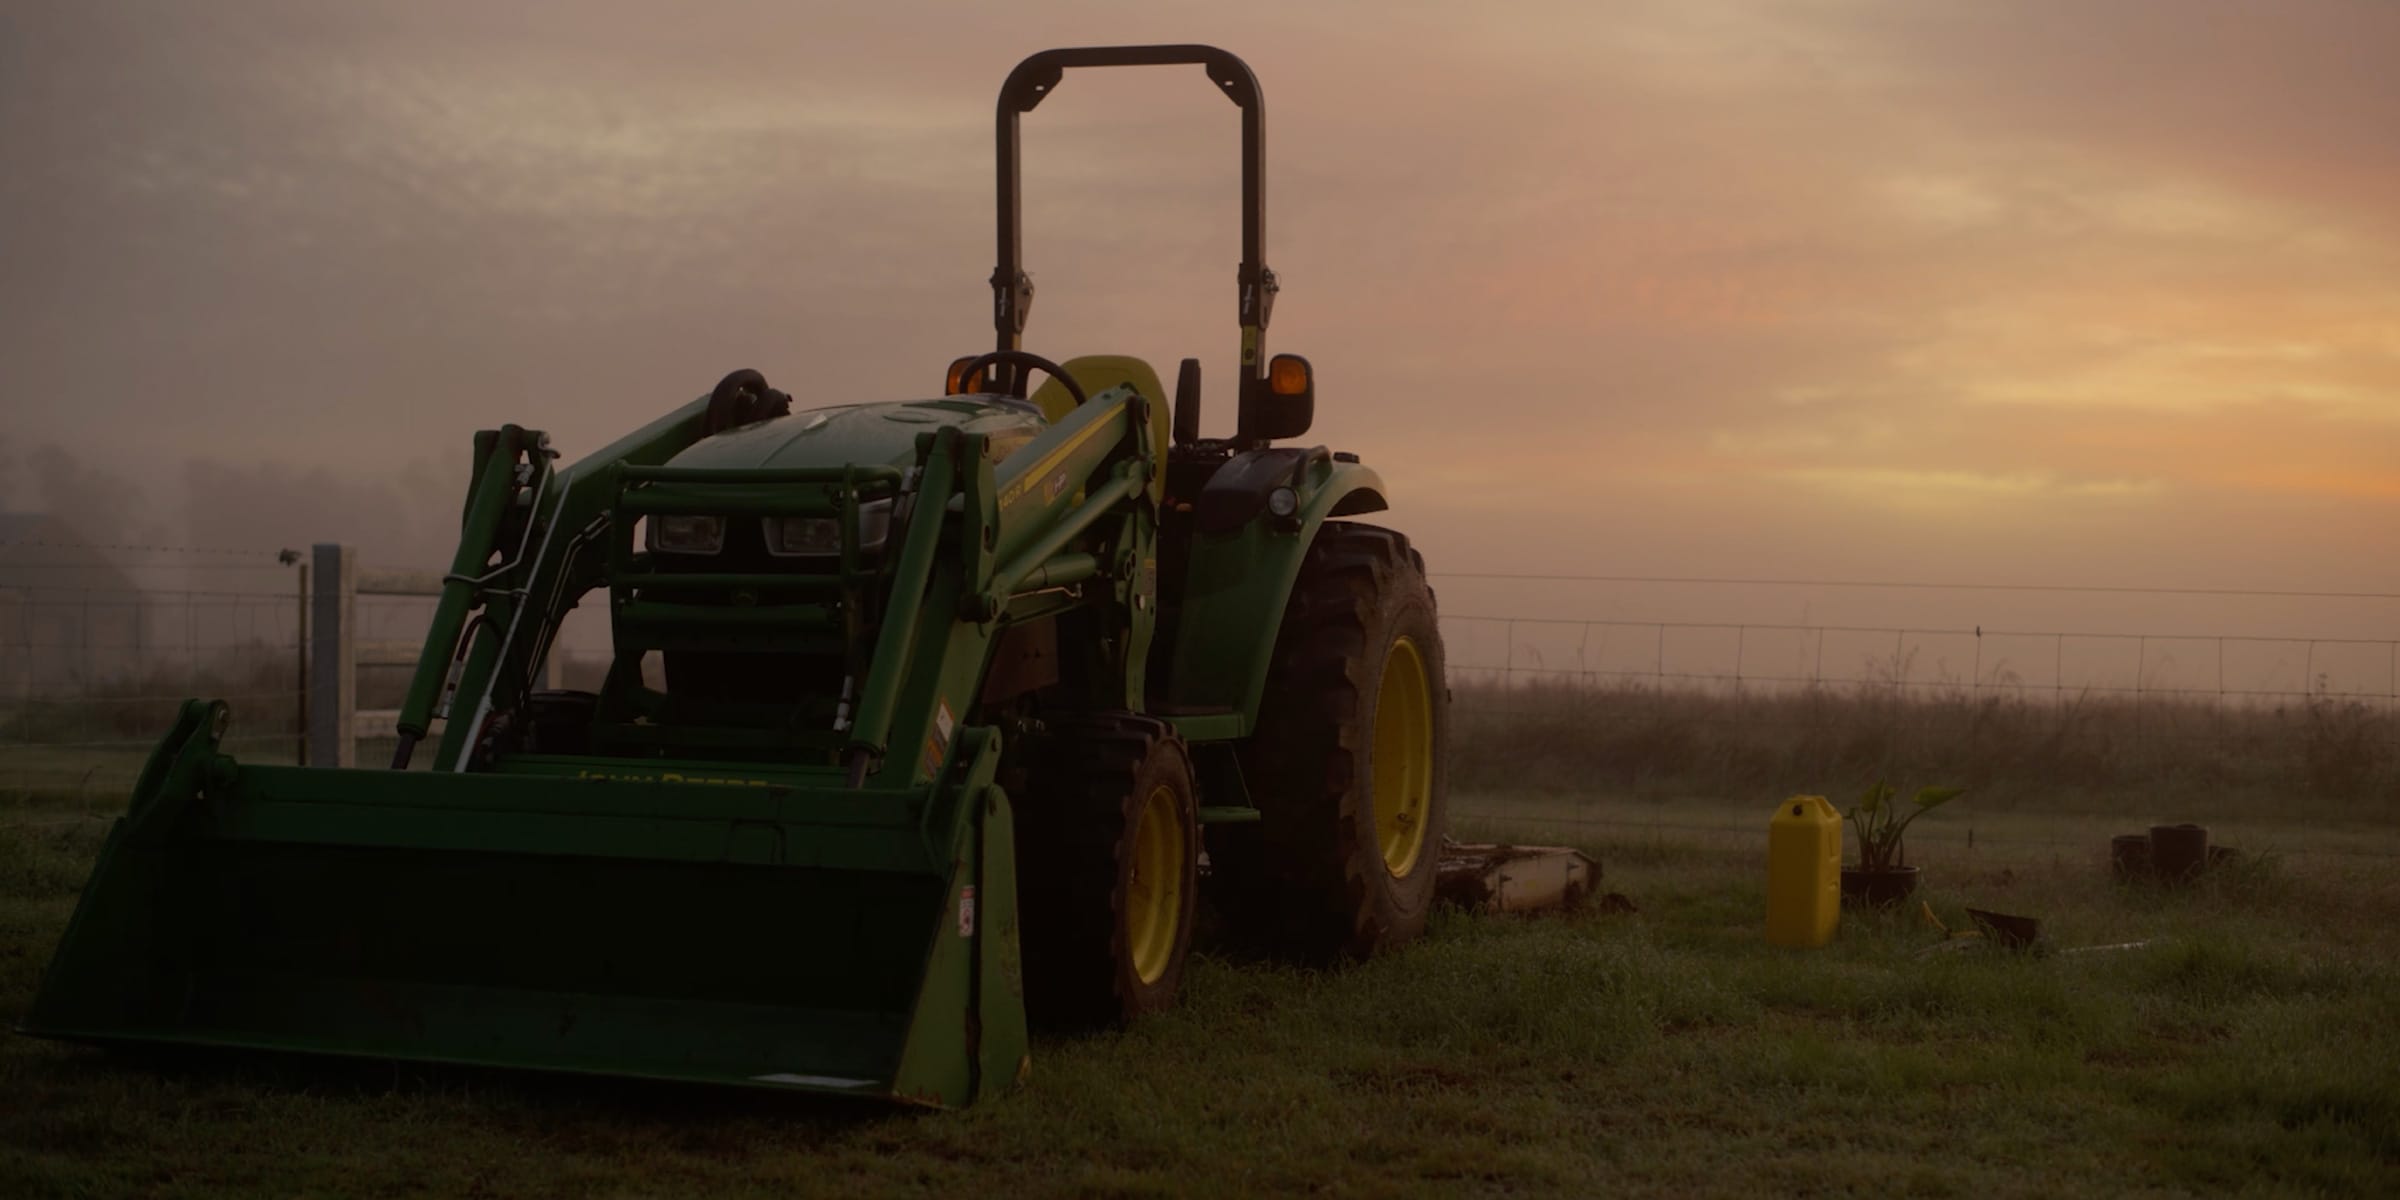 Front view shot of a John Deere utility tractor in a paddock at dusk